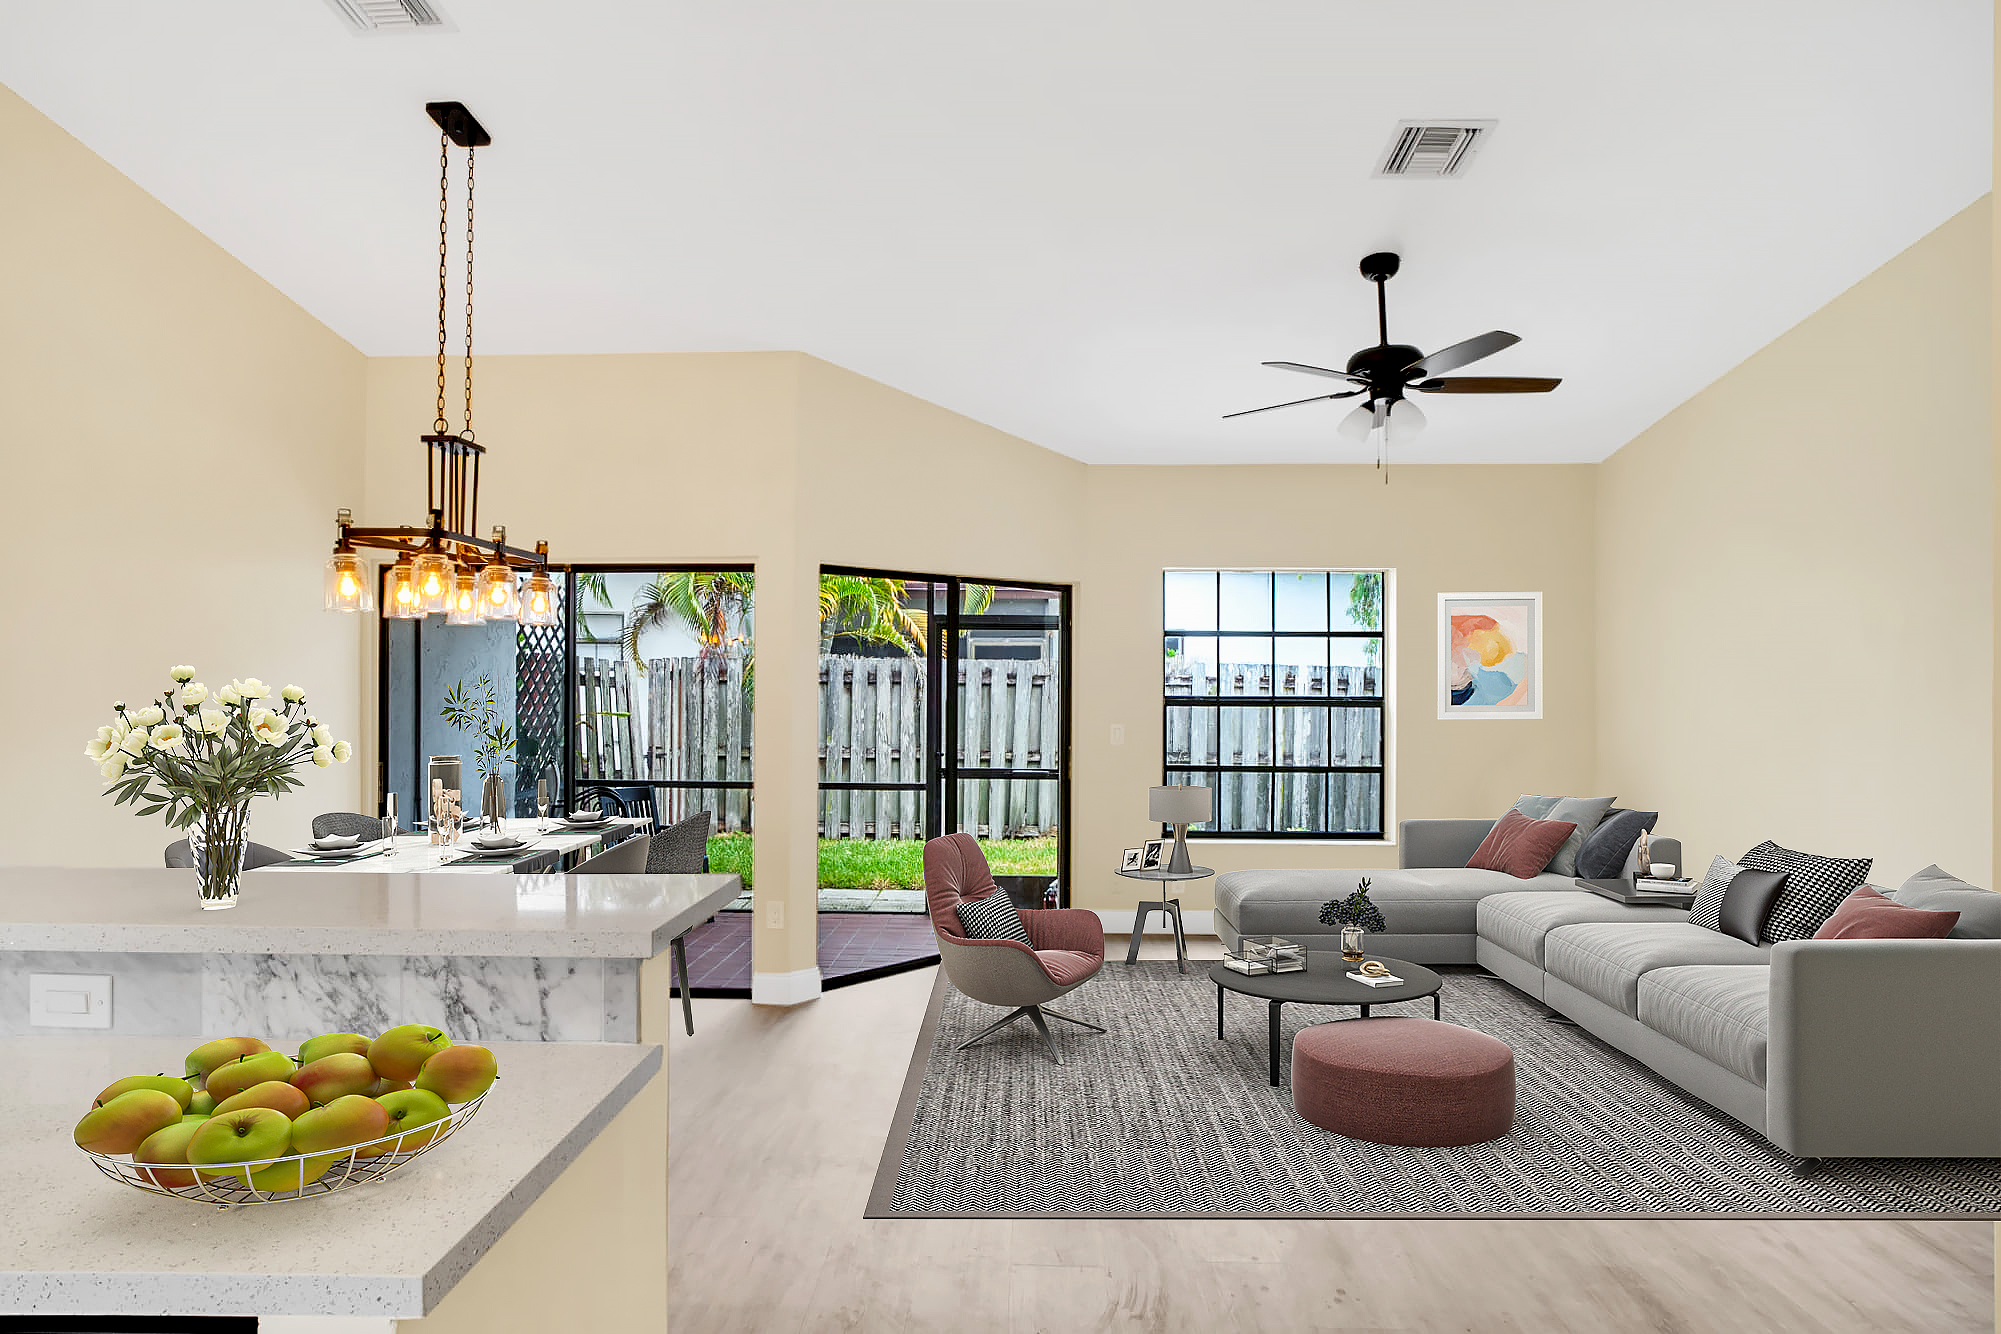 VIRTUAL STAGING IN REAL ESTATE: TOP 6 WAYS TO DRESS UP EMPTINESS